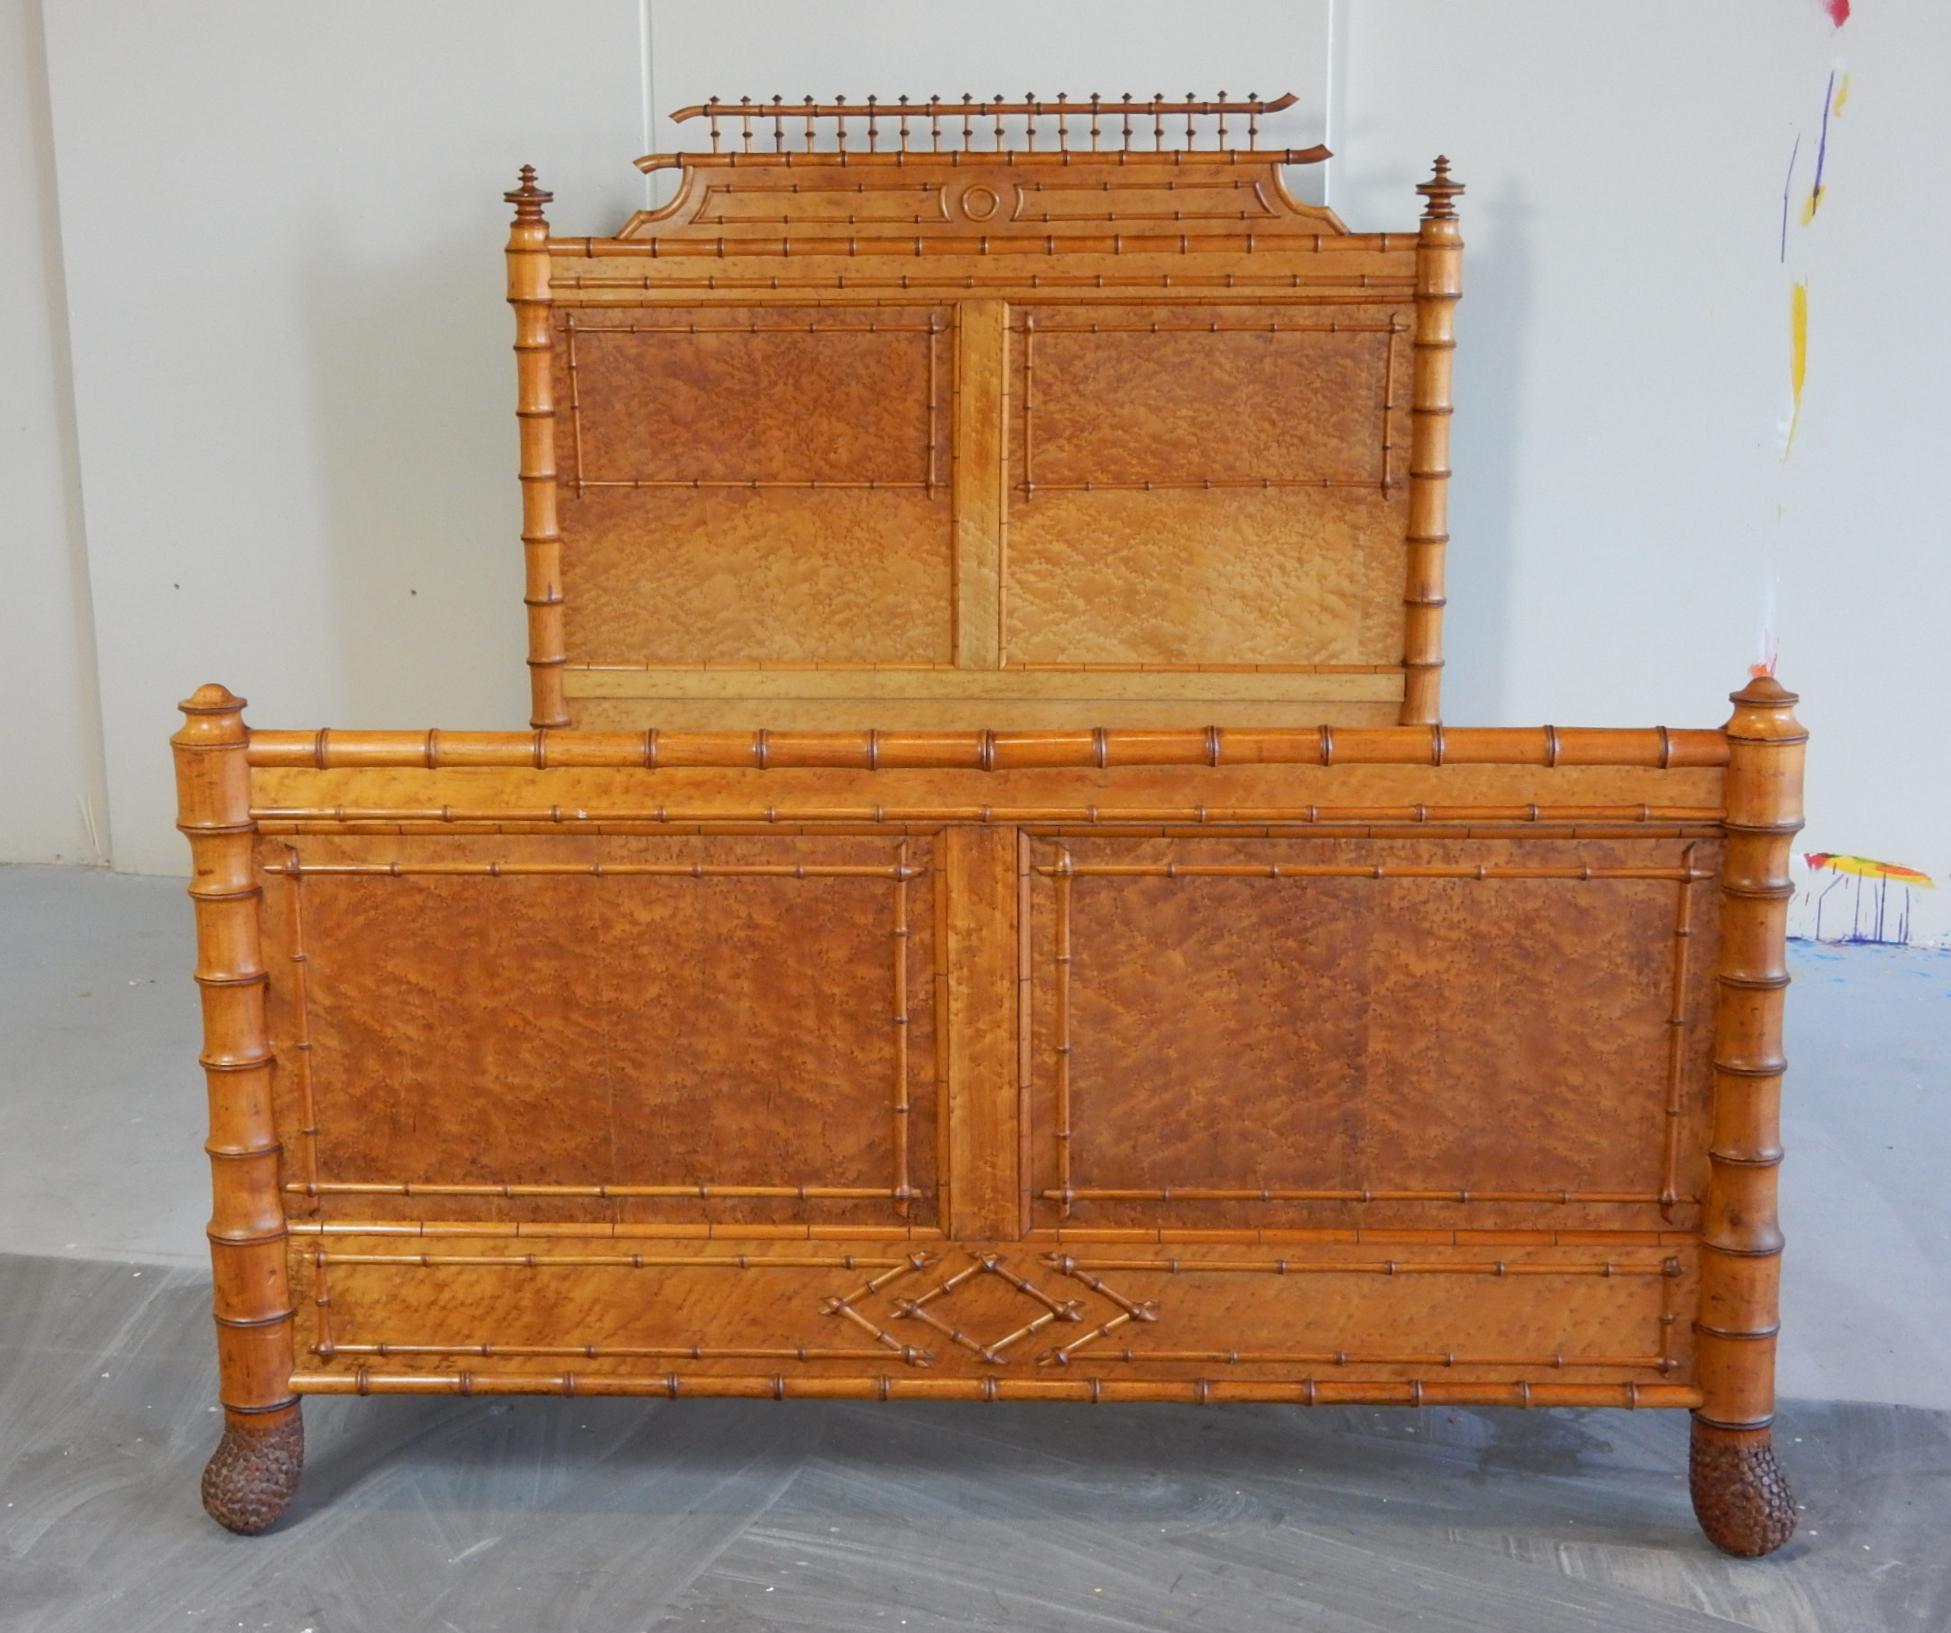 Magnificent artisan bed from the mid-19th century aesthetic movement era.
Made in France by a master carpenter with faux bamboo detail over gorgeous bird's-eye maple burl veneer.
Stylized bamboo legs tapper to a realistic, hand carved bamboo 